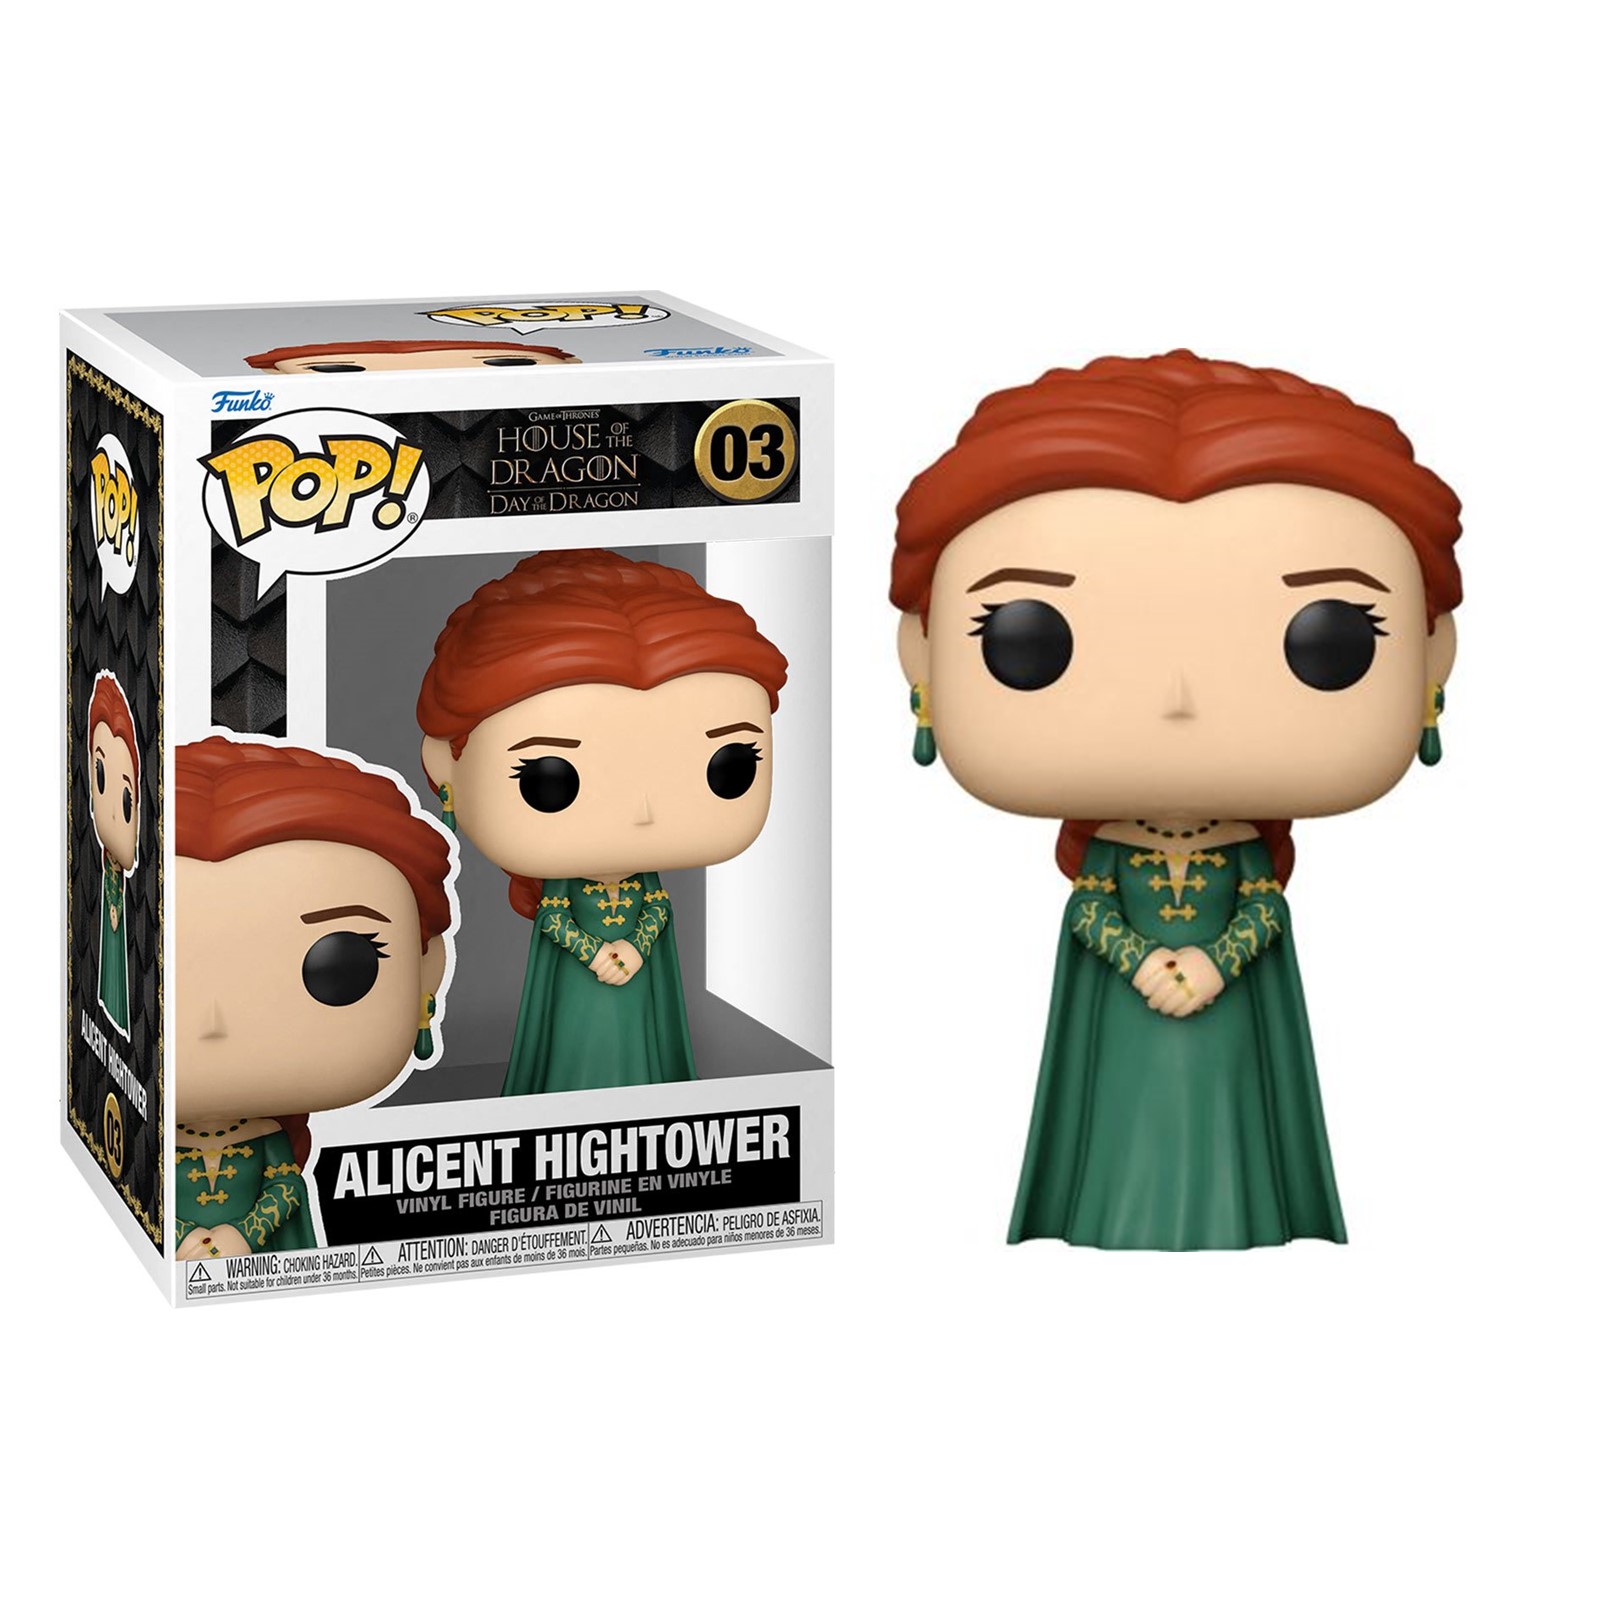 Funko Pop Game Of Thrones House of the dragon Alicent Hightower – 03